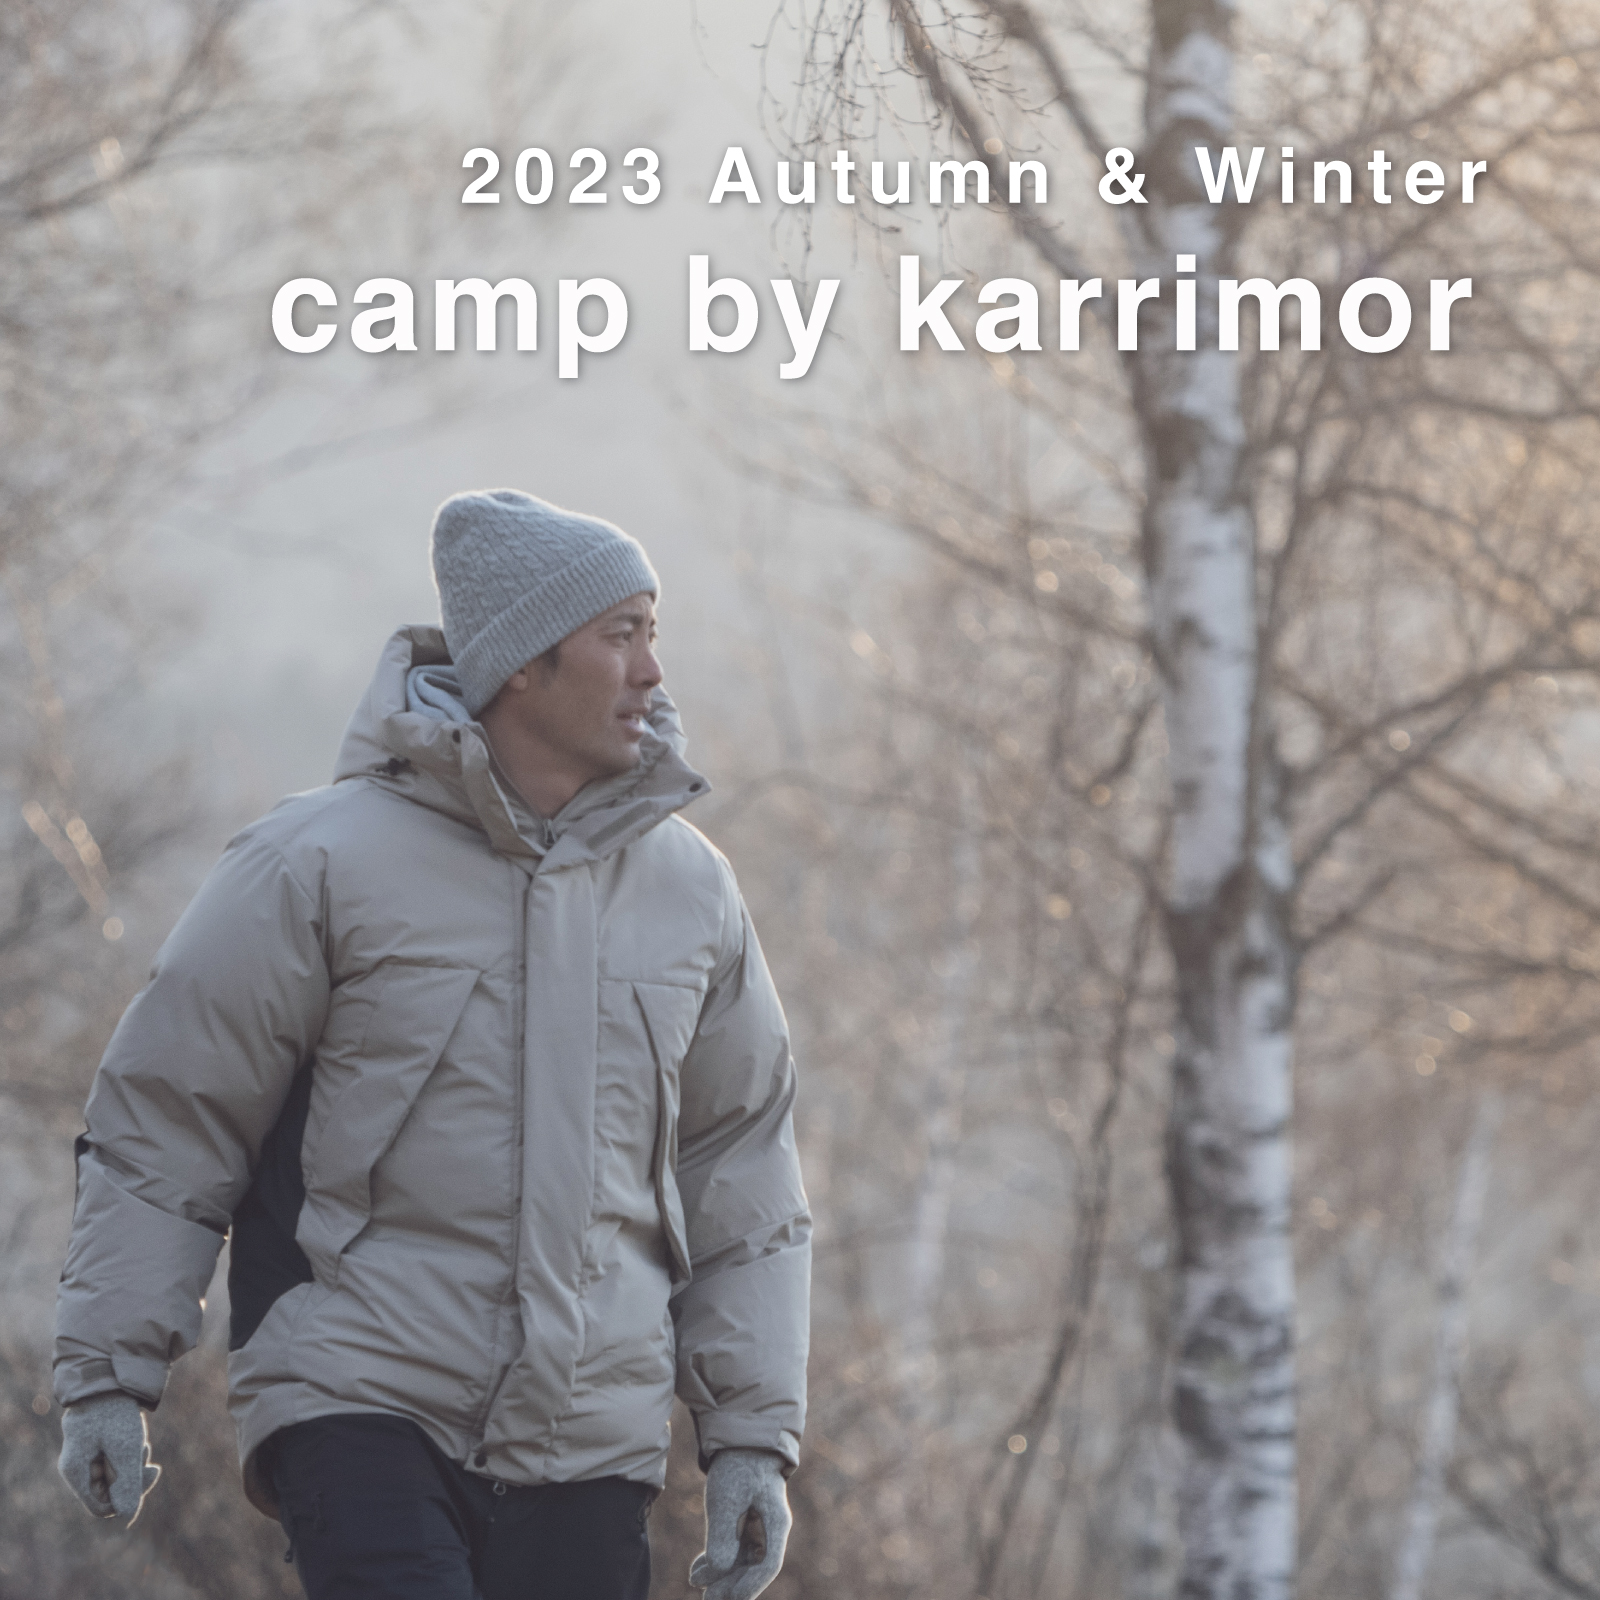 camp by karrimor 2023 Autumn&Winter